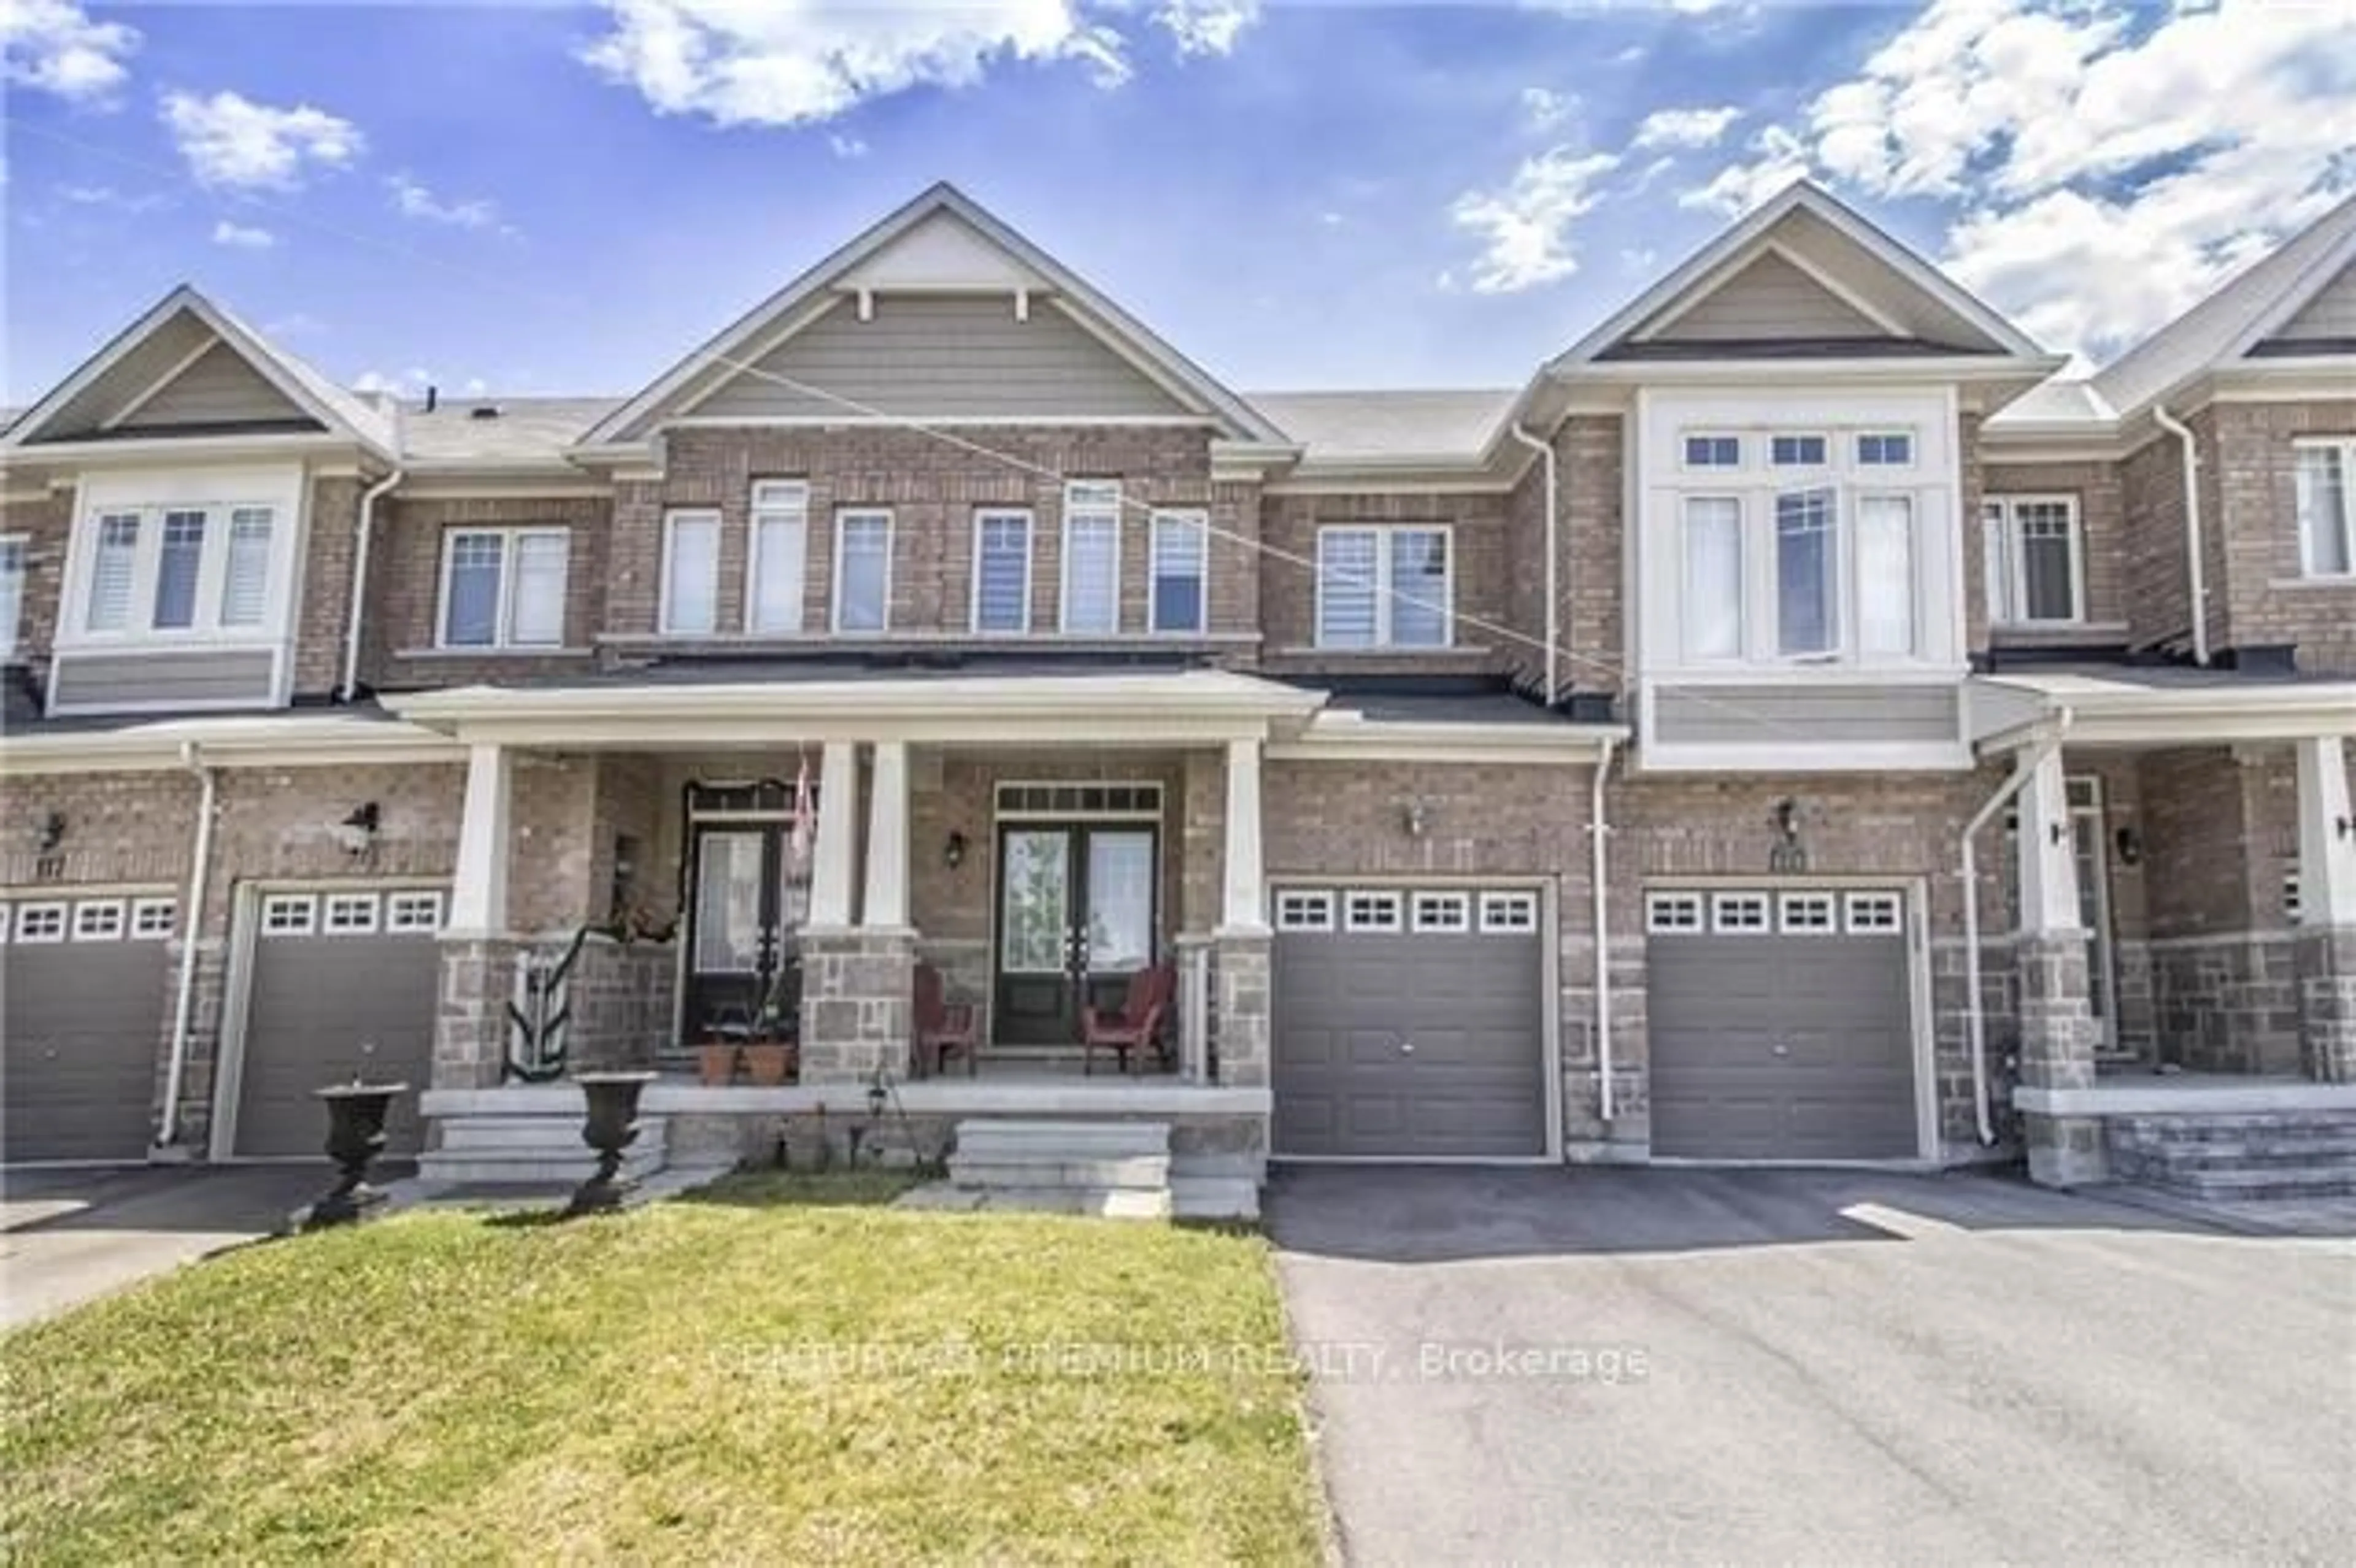 Home with brick exterior material for 113 Windrow St, Richmond Hill Ontario L4E 0Y2